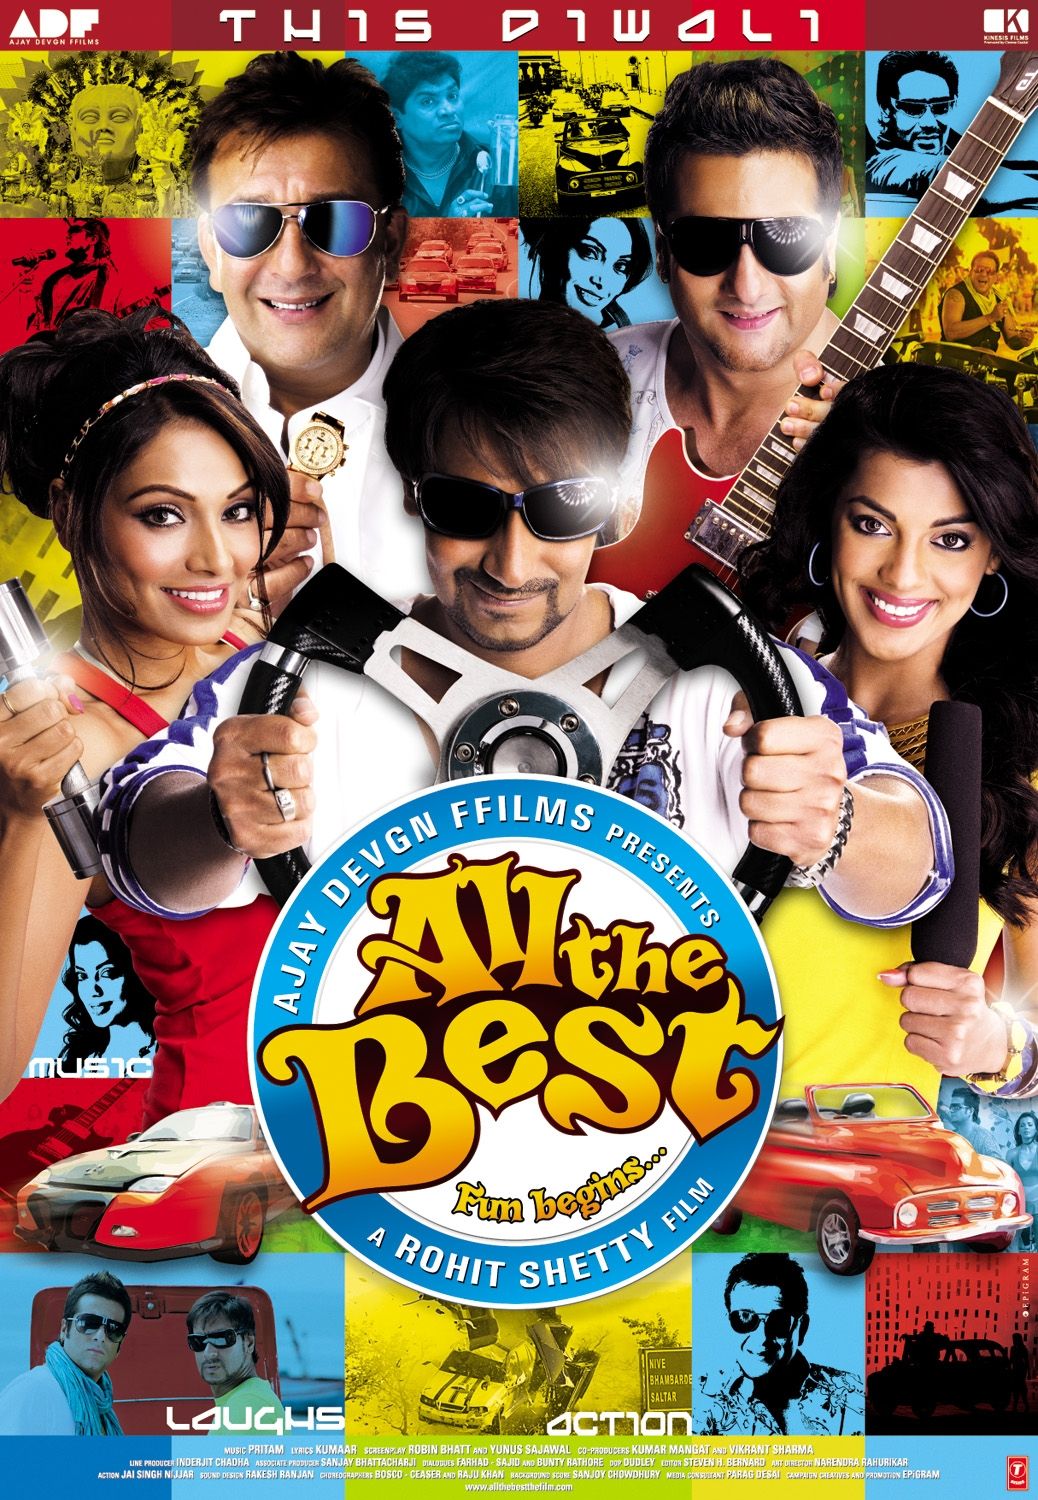 Extra Large Movie Poster Image for All the Best: Fun Begins (#2 of 6)